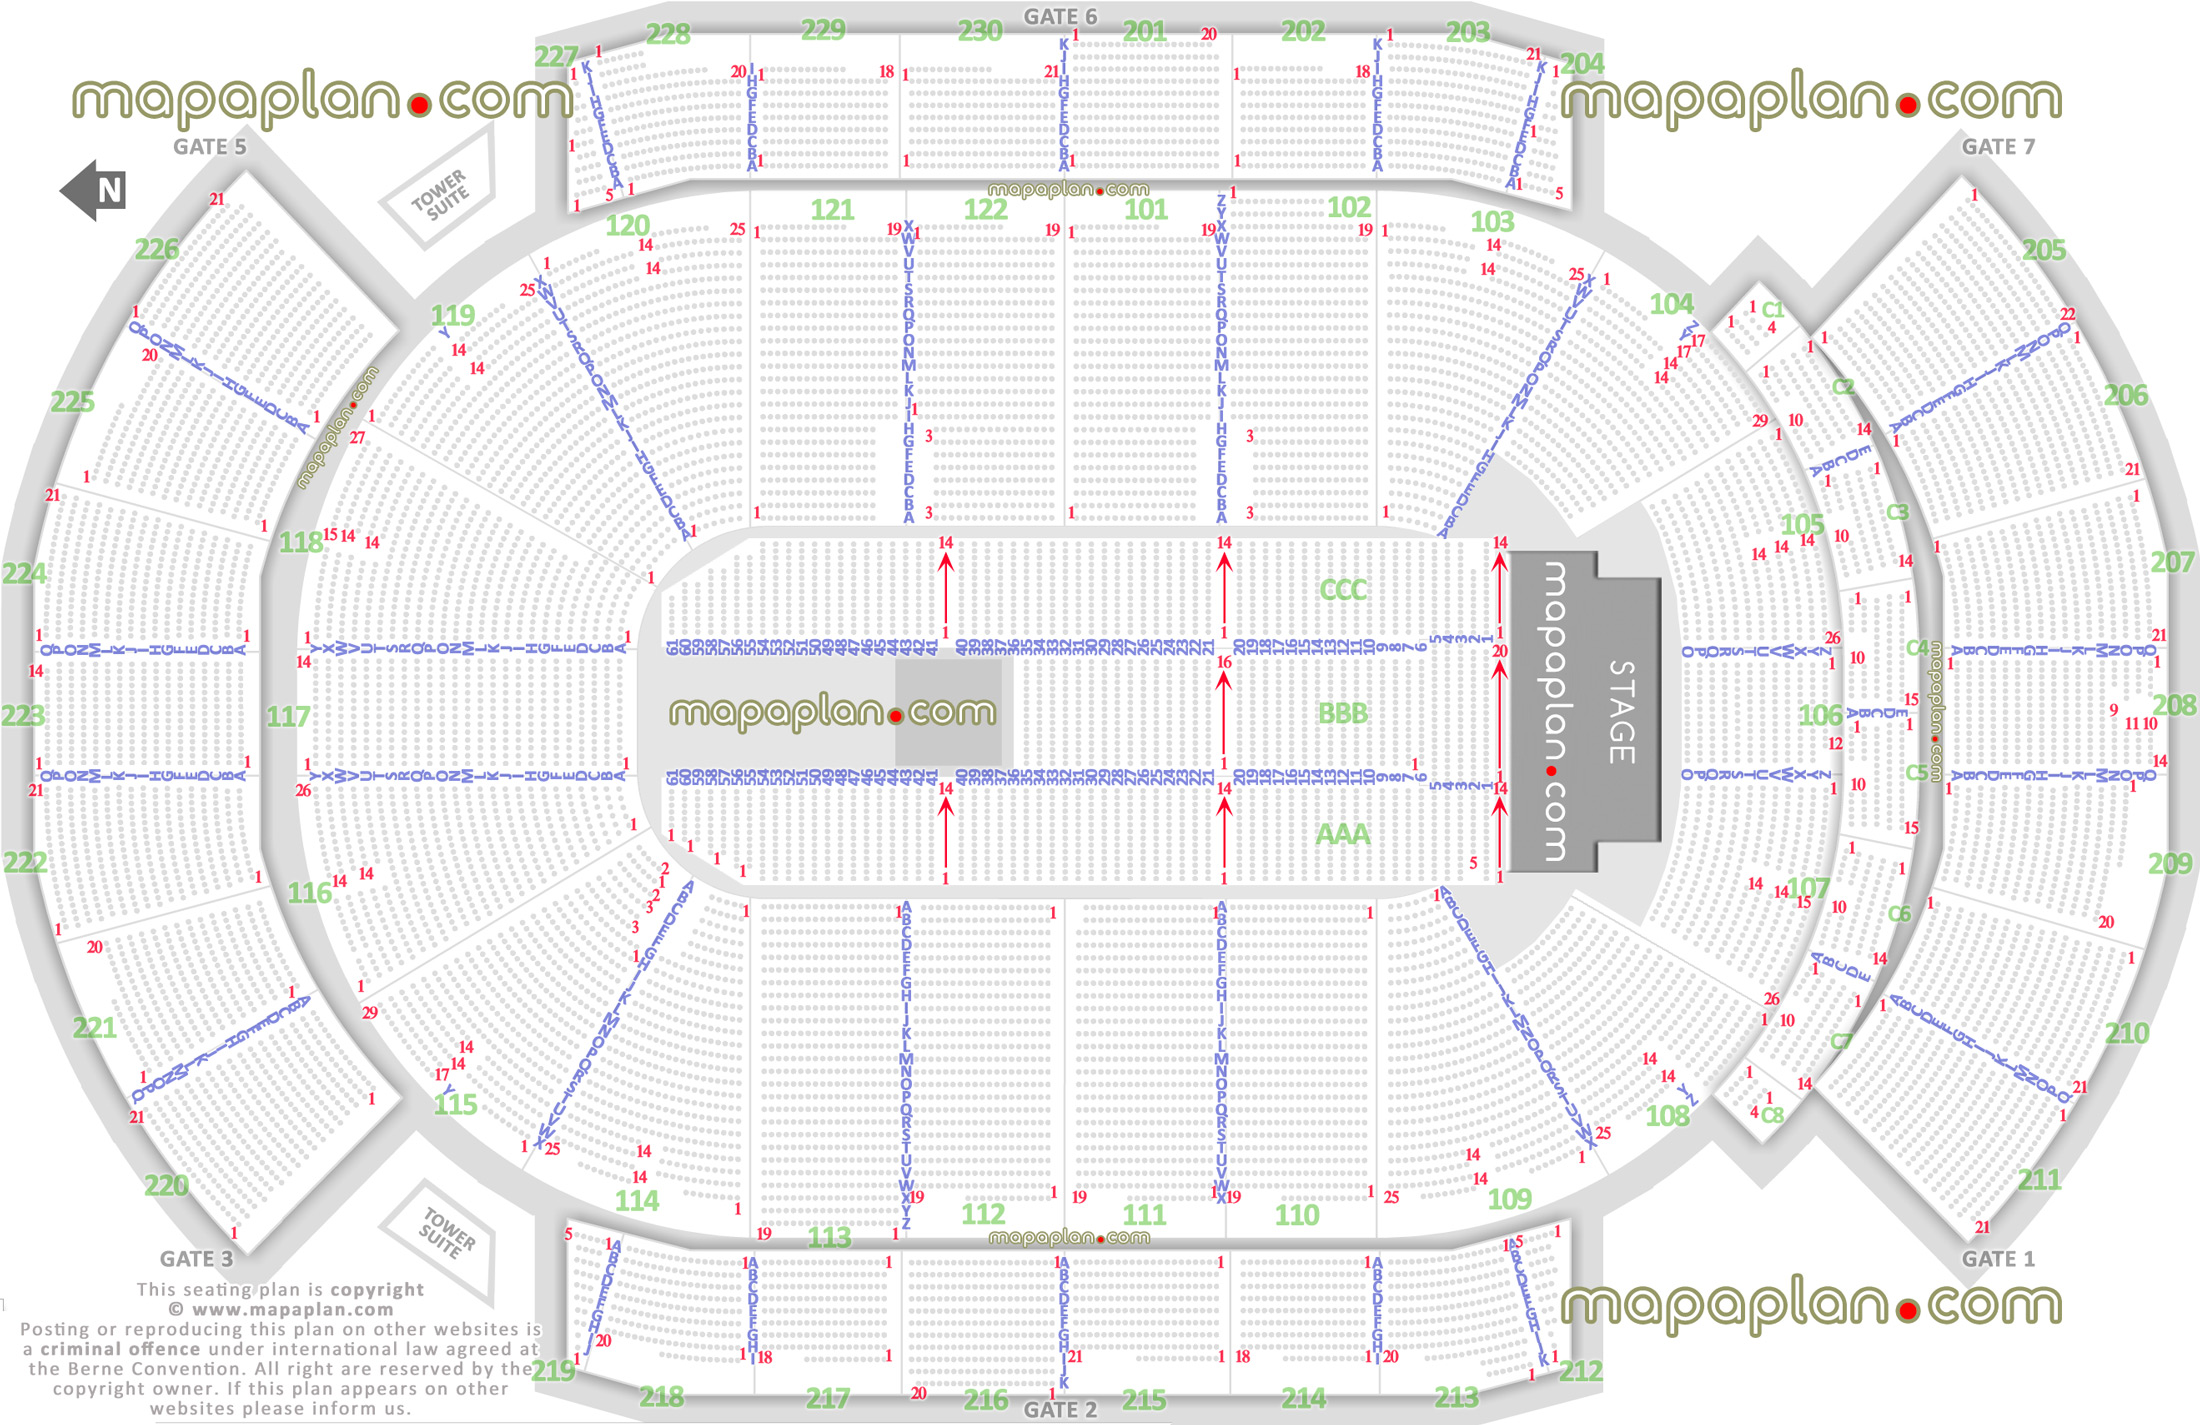 detailed seat row numbers end stage concert sections floor plan map lower club upper level layout Glendale Gila River Arena seating chart